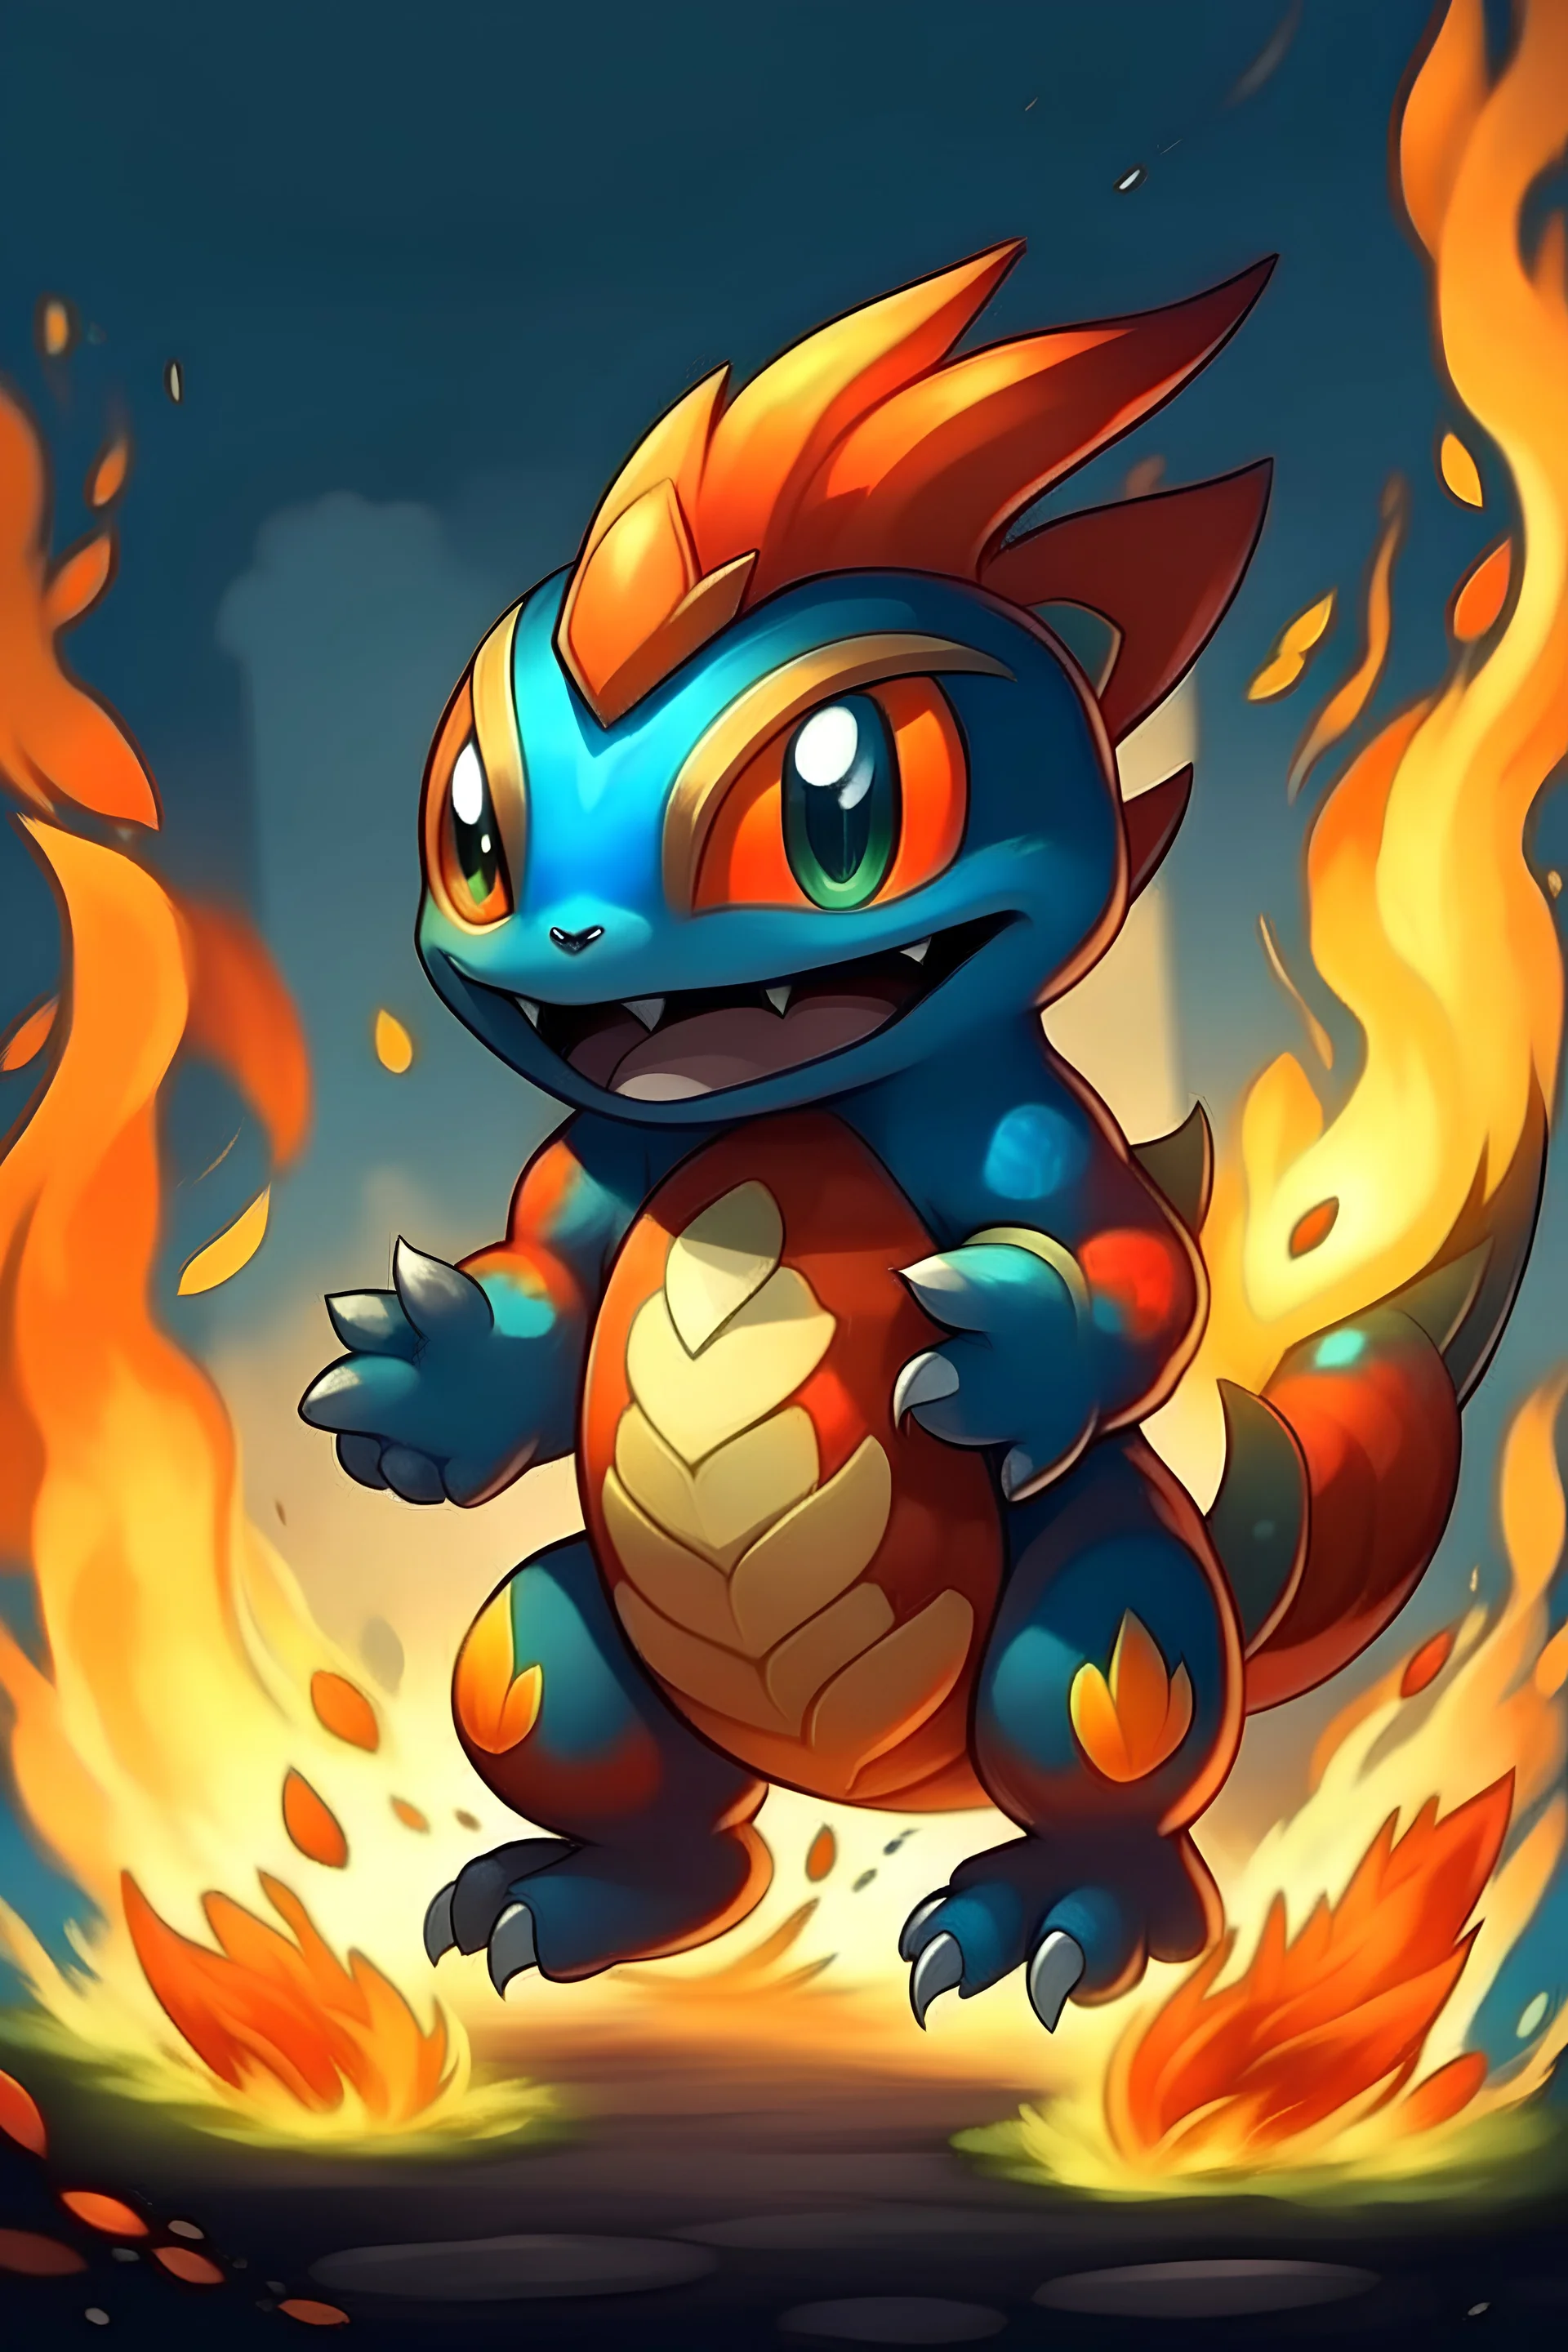 Create a new starter fire Pokemon with his three evolution in style of league of legends